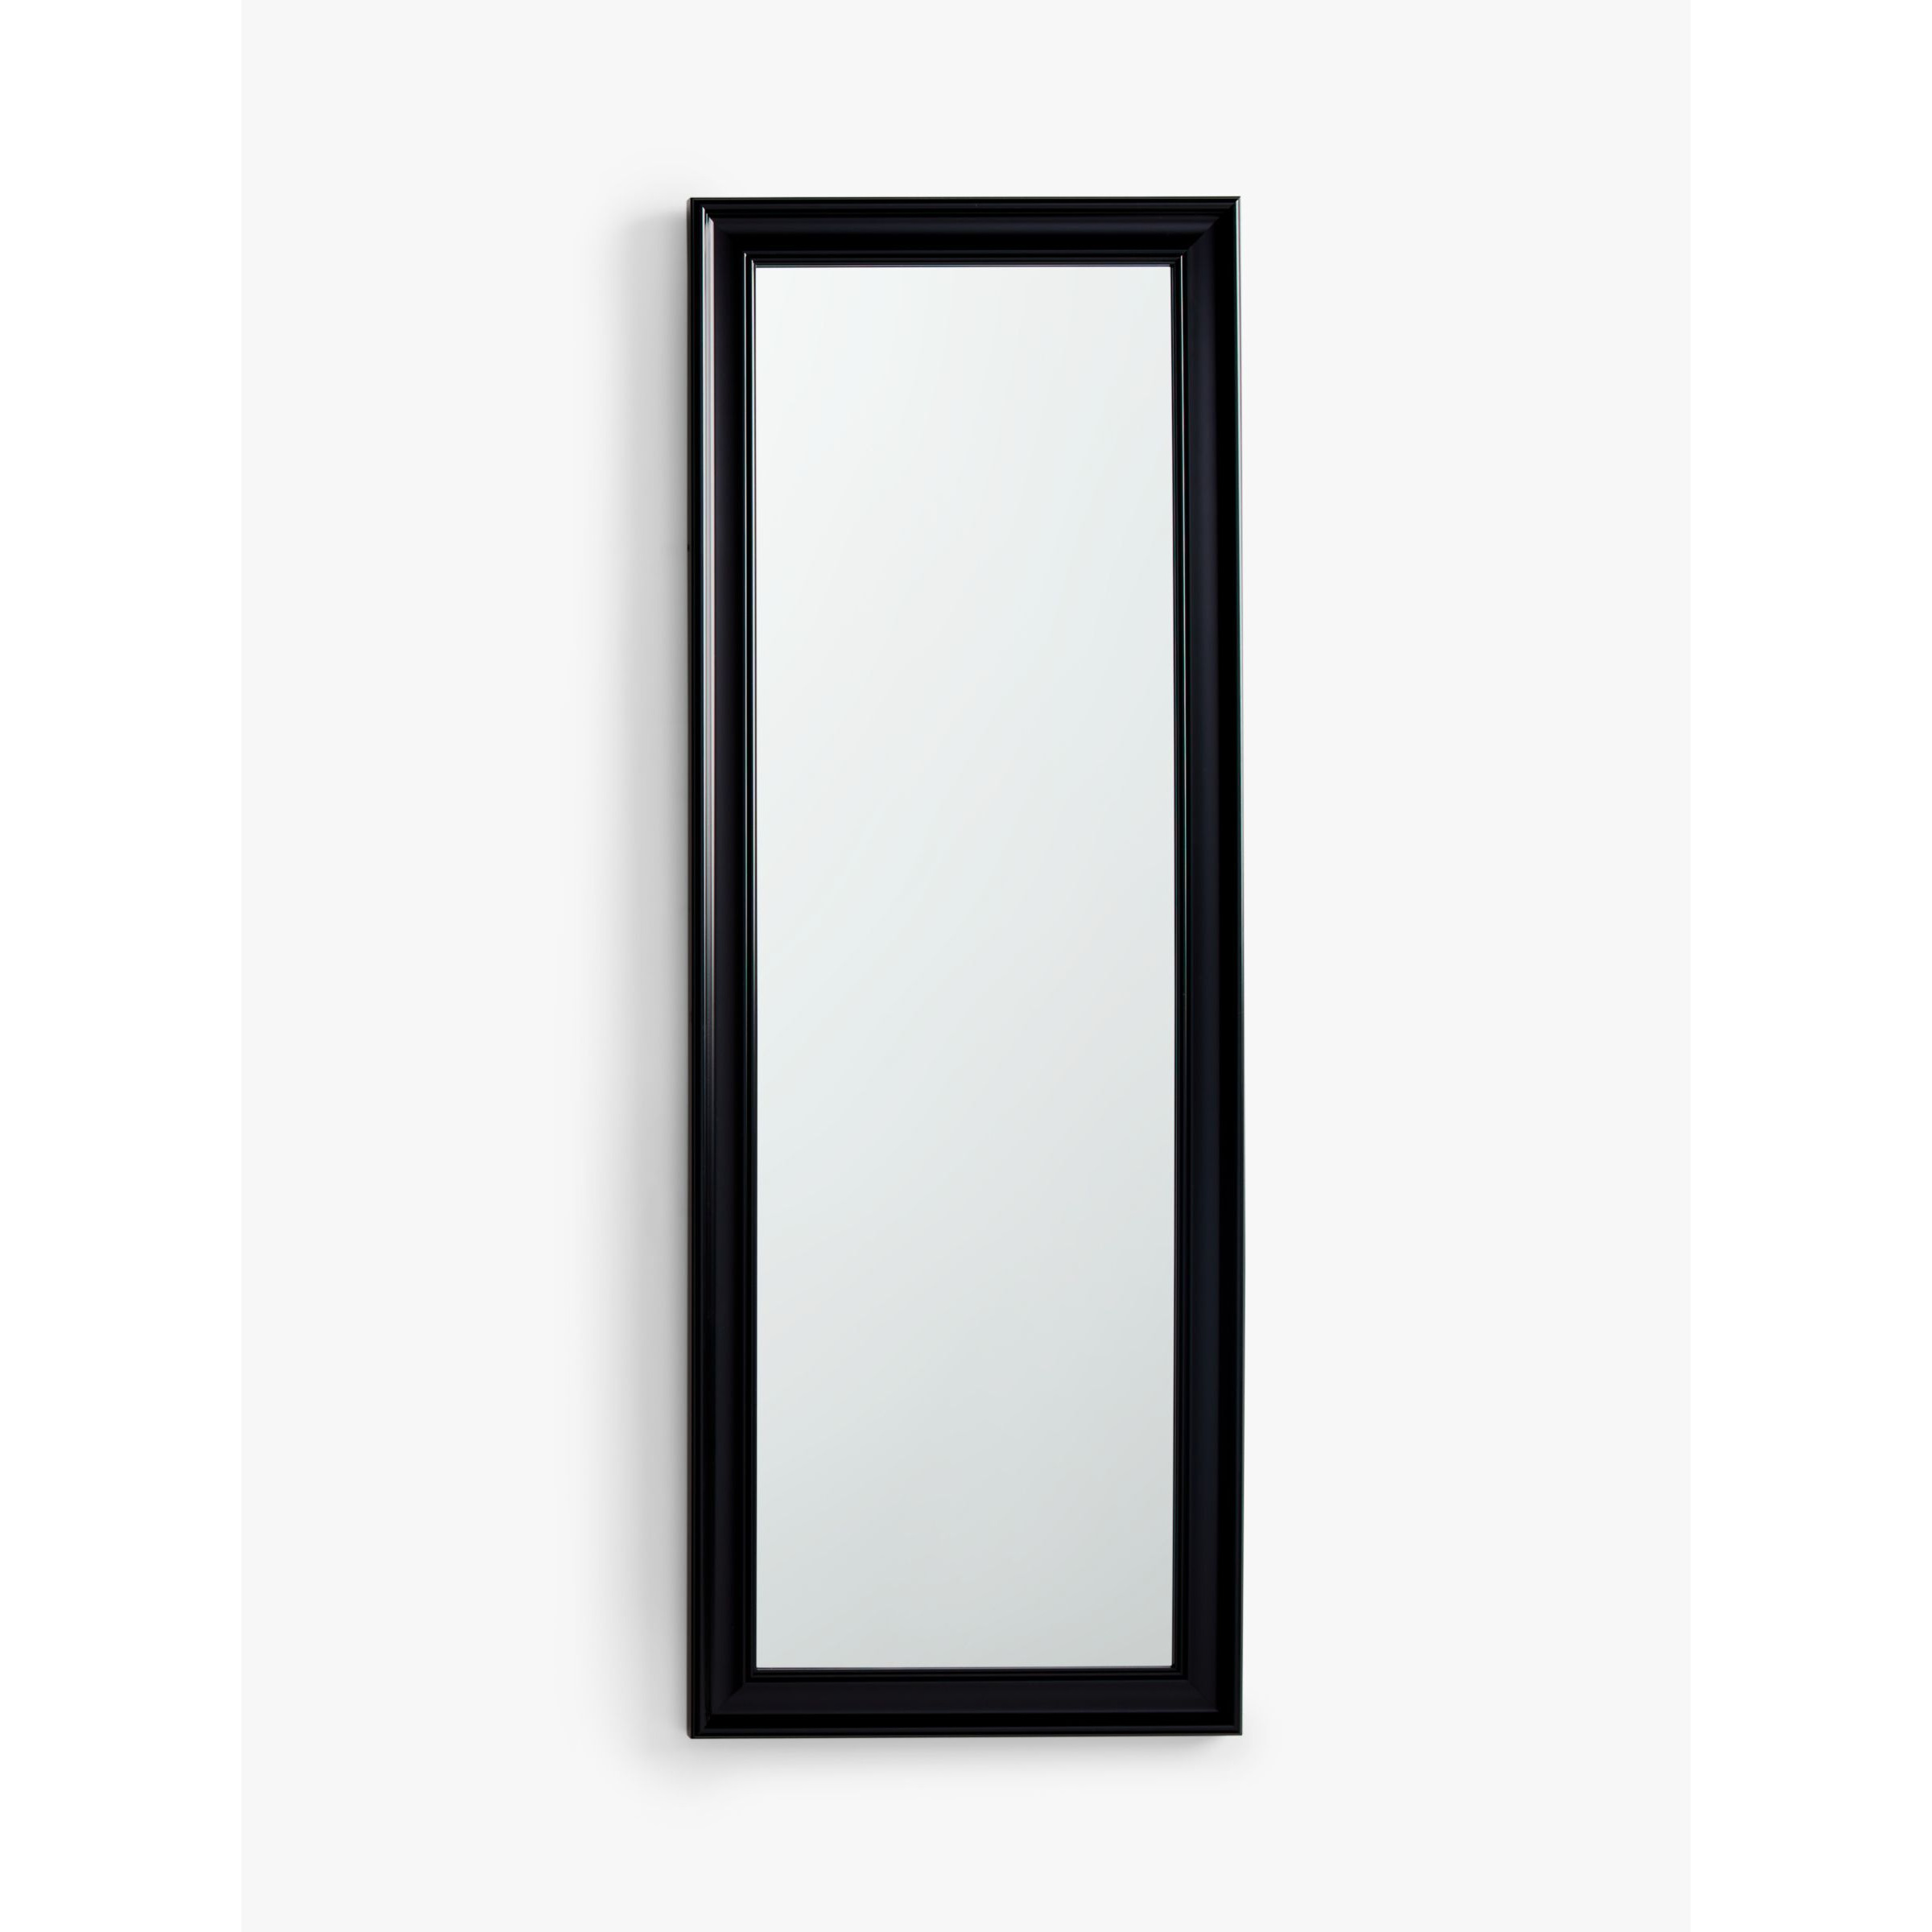 John Lewis ANYDAY Classic Leaner / Wall Mirror, 140 x 50cm, Black - image 1